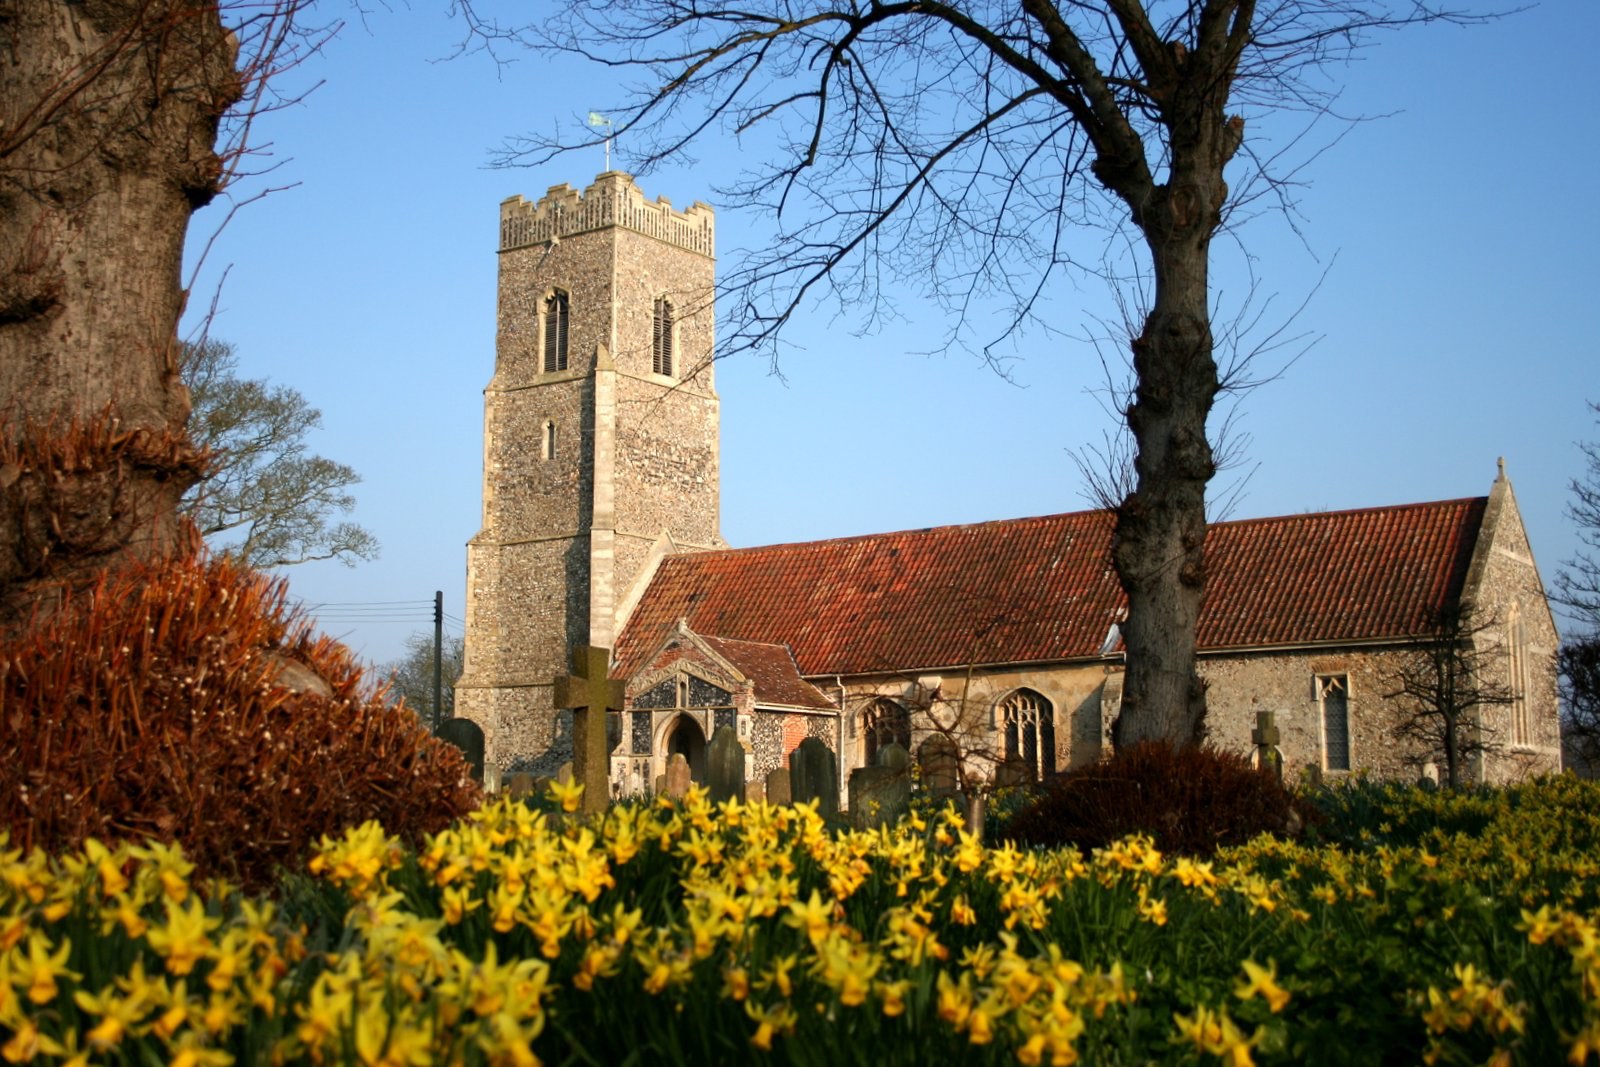 Another view of Snape Church and its daffodils, from near the War Memorial